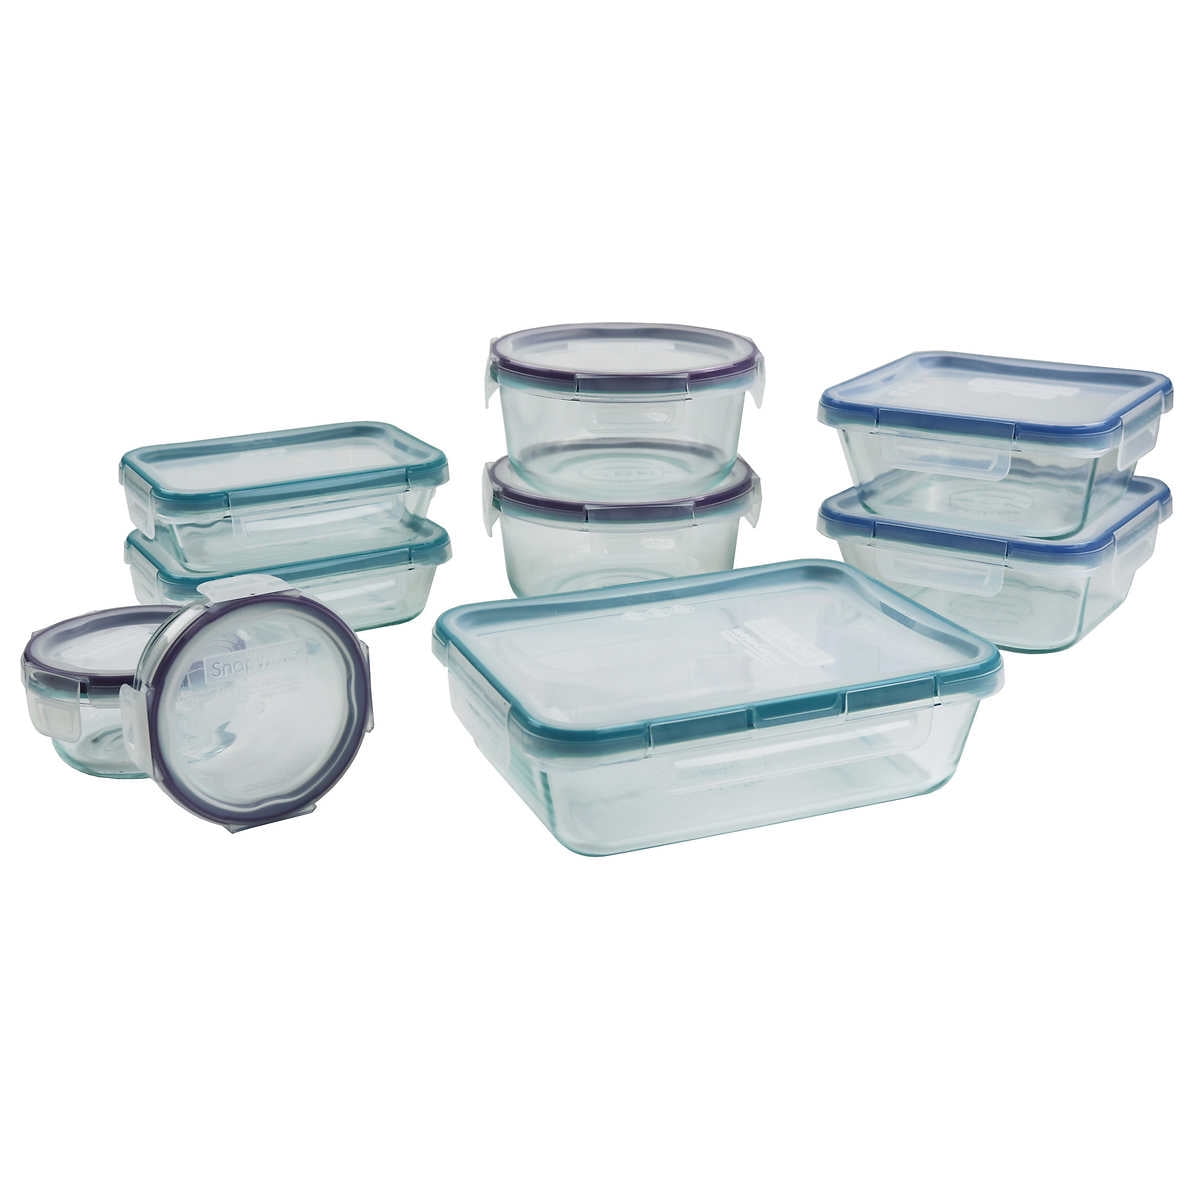 SNAPWARE PYREX 18 Piece GLASS Food STORAGE Unboxing & Review